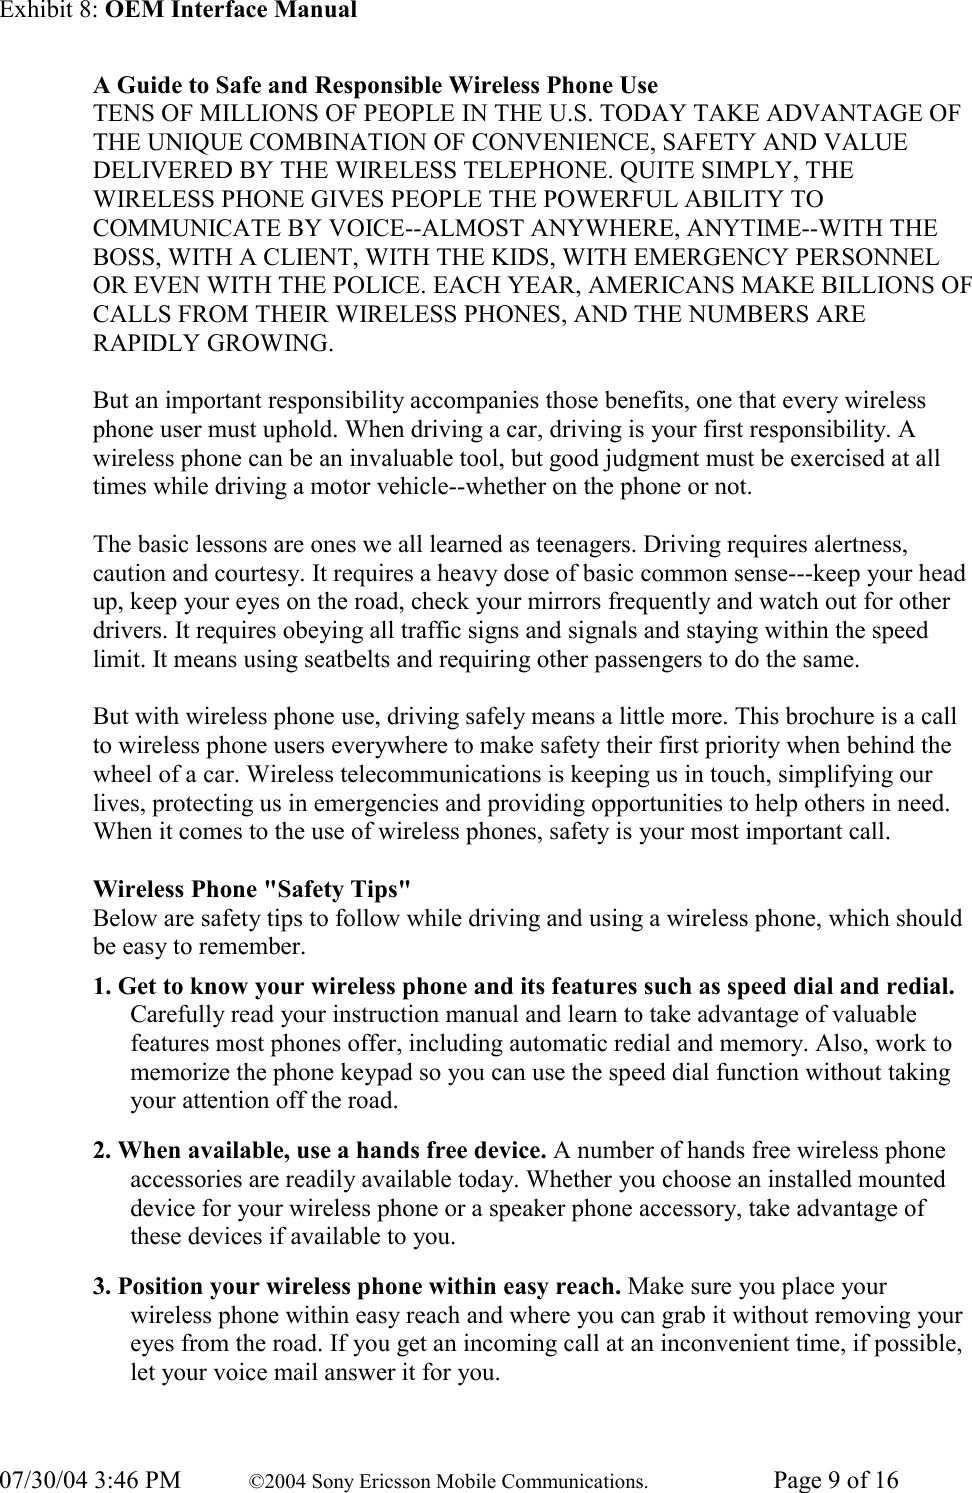 Exhibit 8: OEM Interface Manual 07/30/04 3:46 PM  ©2004 Sony Ericsson Mobile Communications.  Page 9 of 16 A Guide to Safe and Responsible Wireless Phone Use  TENS OF MILLIONS OF PEOPLE IN THE U.S. TODAY TAKE ADVANTAGE OF THE UNIQUE COMBINATION OF CONVENIENCE, SAFETY AND VALUE DELIVERED BY THE WIRELESS TELEPHONE. QUITE SIMPLY, THE WIRELESS PHONE GIVES PEOPLE THE POWERFUL ABILITY TO COMMUNICATE BY VOICE--ALMOST ANYWHERE, ANYTIME--WITH THE BOSS, WITH A CLIENT, WITH THE KIDS, WITH EMERGENCY PERSONNEL OR EVEN WITH THE POLICE. EACH YEAR, AMERICANS MAKE BILLIONS OF CALLS FROM THEIR WIRELESS PHONES, AND THE NUMBERS ARE RAPIDLY GROWING.   But an important responsibility accompanies those benefits, one that every wireless phone user must uphold. When driving a car, driving is your first responsibility. A wireless phone can be an invaluable tool, but good judgment must be exercised at all times while driving a motor vehicle--whether on the phone or not.   The basic lessons are ones we all learned as teenagers. Driving requires alertness, caution and courtesy. It requires a heavy dose of basic common sense---keep your head up, keep your eyes on the road, check your mirrors frequently and watch out for other drivers. It requires obeying all traffic signs and signals and staying within the speed limit. It means using seatbelts and requiring other passengers to do the same.   But with wireless phone use, driving safely means a little more. This brochure is a call to wireless phone users everywhere to make safety their first priority when behind the wheel of a car. Wireless telecommunications is keeping us in touch, simplifying our lives, protecting us in emergencies and providing opportunities to help others in need. When it comes to the use of wireless phones, safety is your most important call.   Wireless Phone &quot;Safety Tips&quot;  Below are safety tips to follow while driving and using a wireless phone, which should be easy to remember.  1. Get to know your wireless phone and its features such as speed dial and redial. Carefully read your instruction manual and learn to take advantage of valuable features most phones offer, including automatic redial and memory. Also, work to memorize the phone keypad so you can use the speed dial function without taking your attention off the road.  2. When available, use a hands free device. A number of hands free wireless phone accessories are readily available today. Whether you choose an installed mounted device for your wireless phone or a speaker phone accessory, take advantage of these devices if available to you.  3. Position your wireless phone within easy reach. Make sure you place your wireless phone within easy reach and where you can grab it without removing your eyes from the road. If you get an incoming call at an inconvenient time, if possible, let your voice mail answer it for you.  